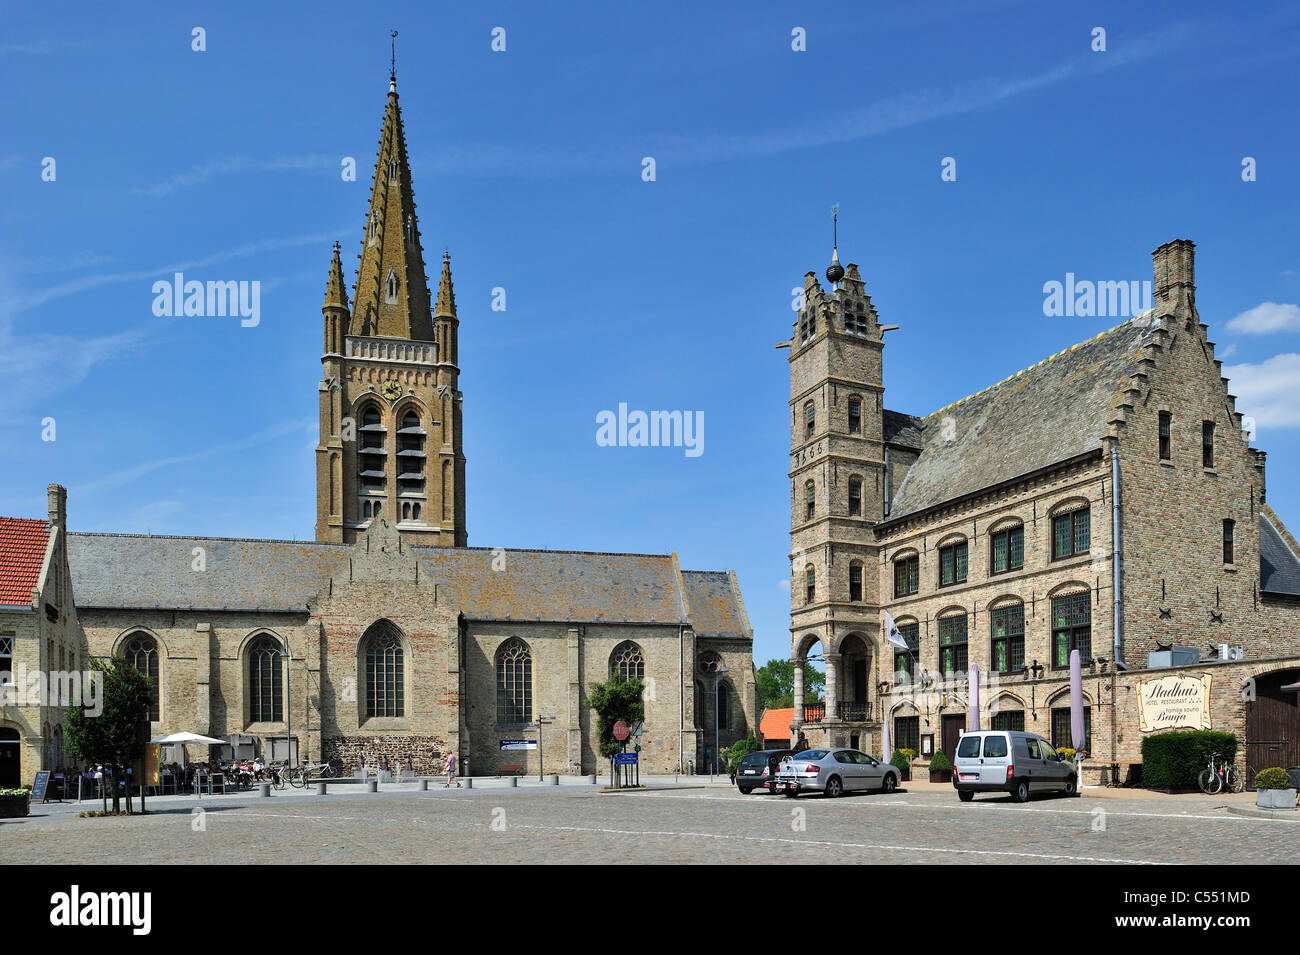 The St. Peter's Church and old town hall with belfry of Lo, Lo-Reninge, Belgium Stock Photo